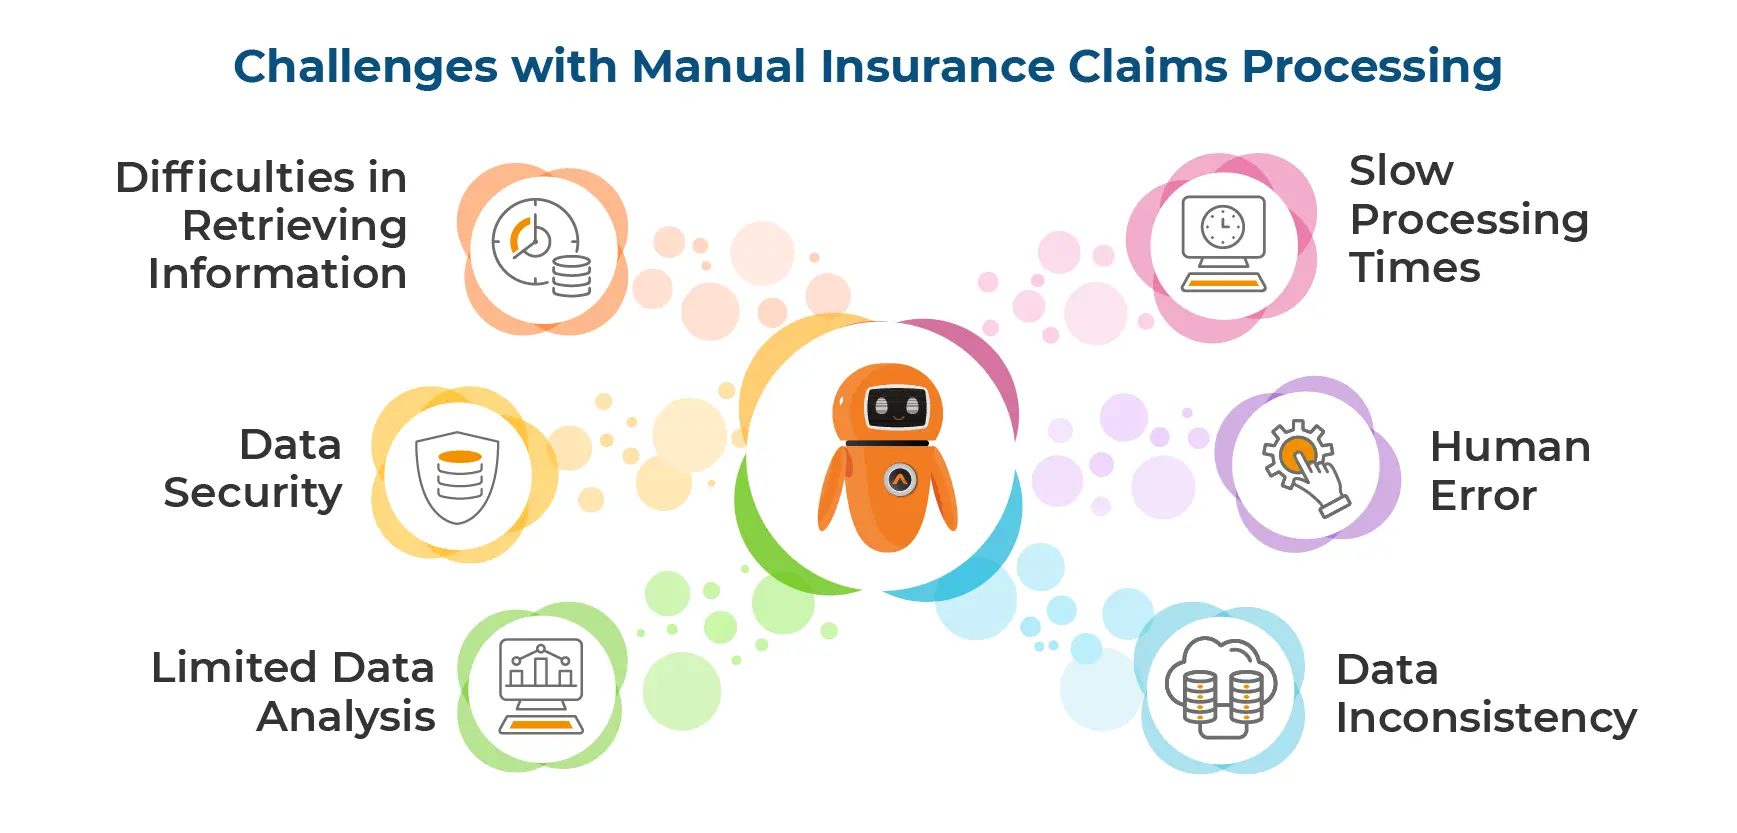 Challenges with Manual Insurance Claims Processing